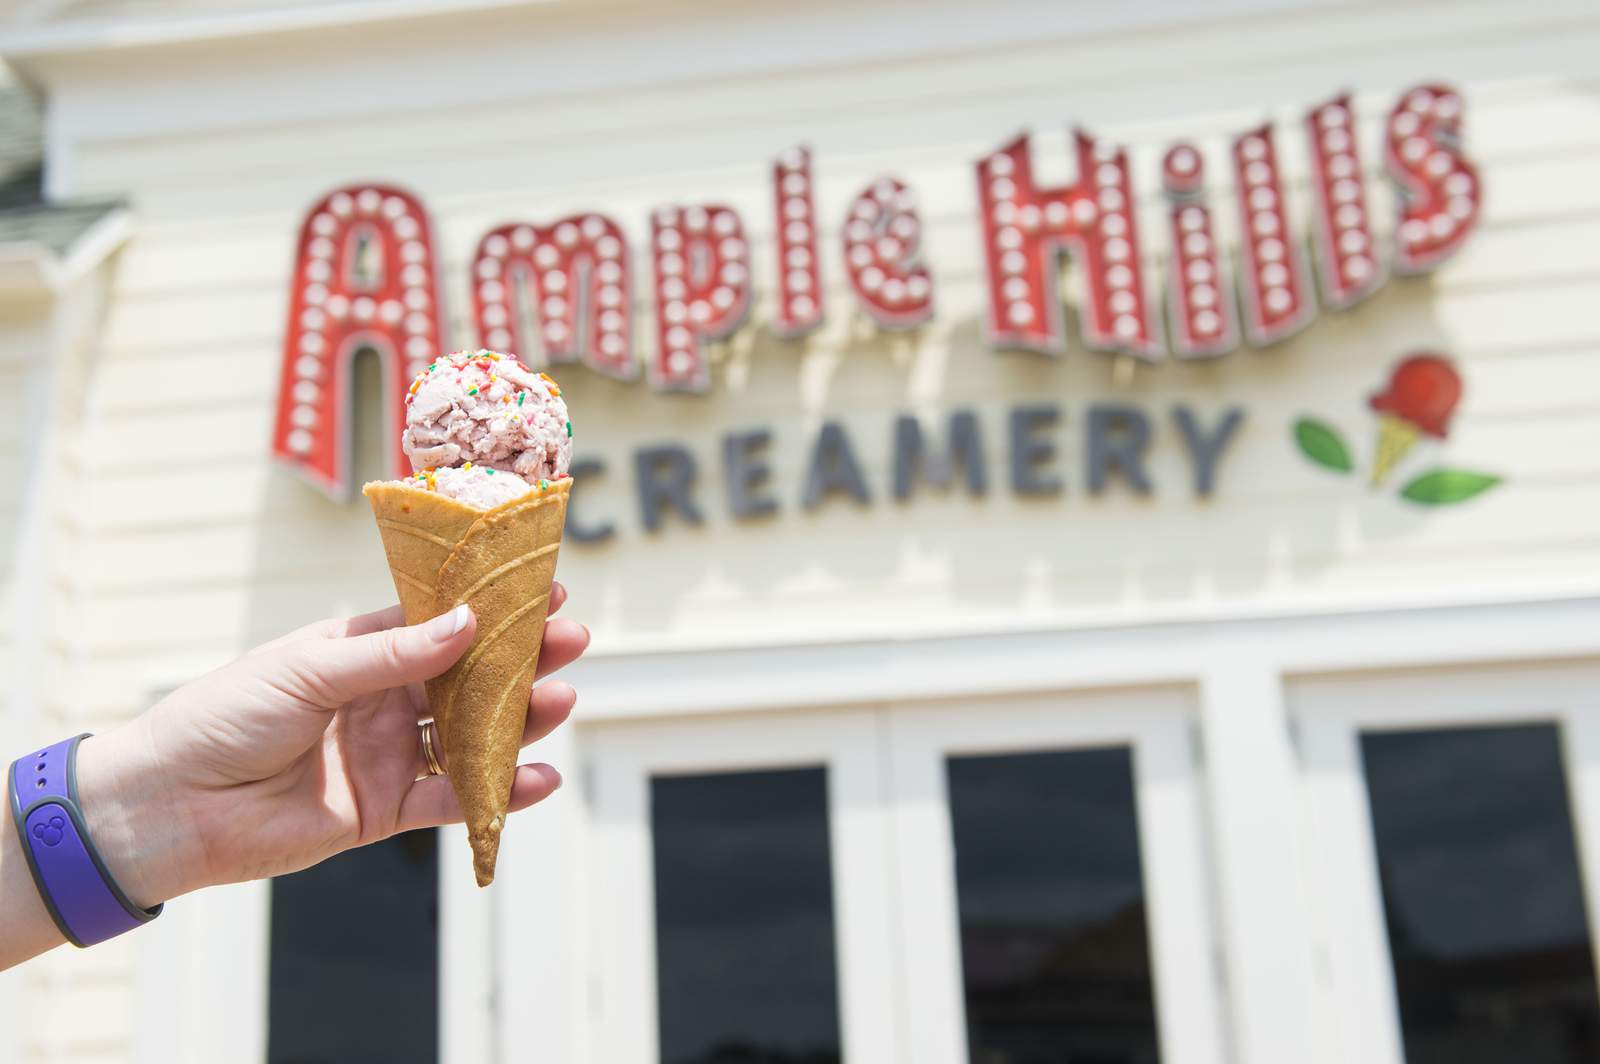 Ample Hills Creamery will not reopen at Walt Disney World